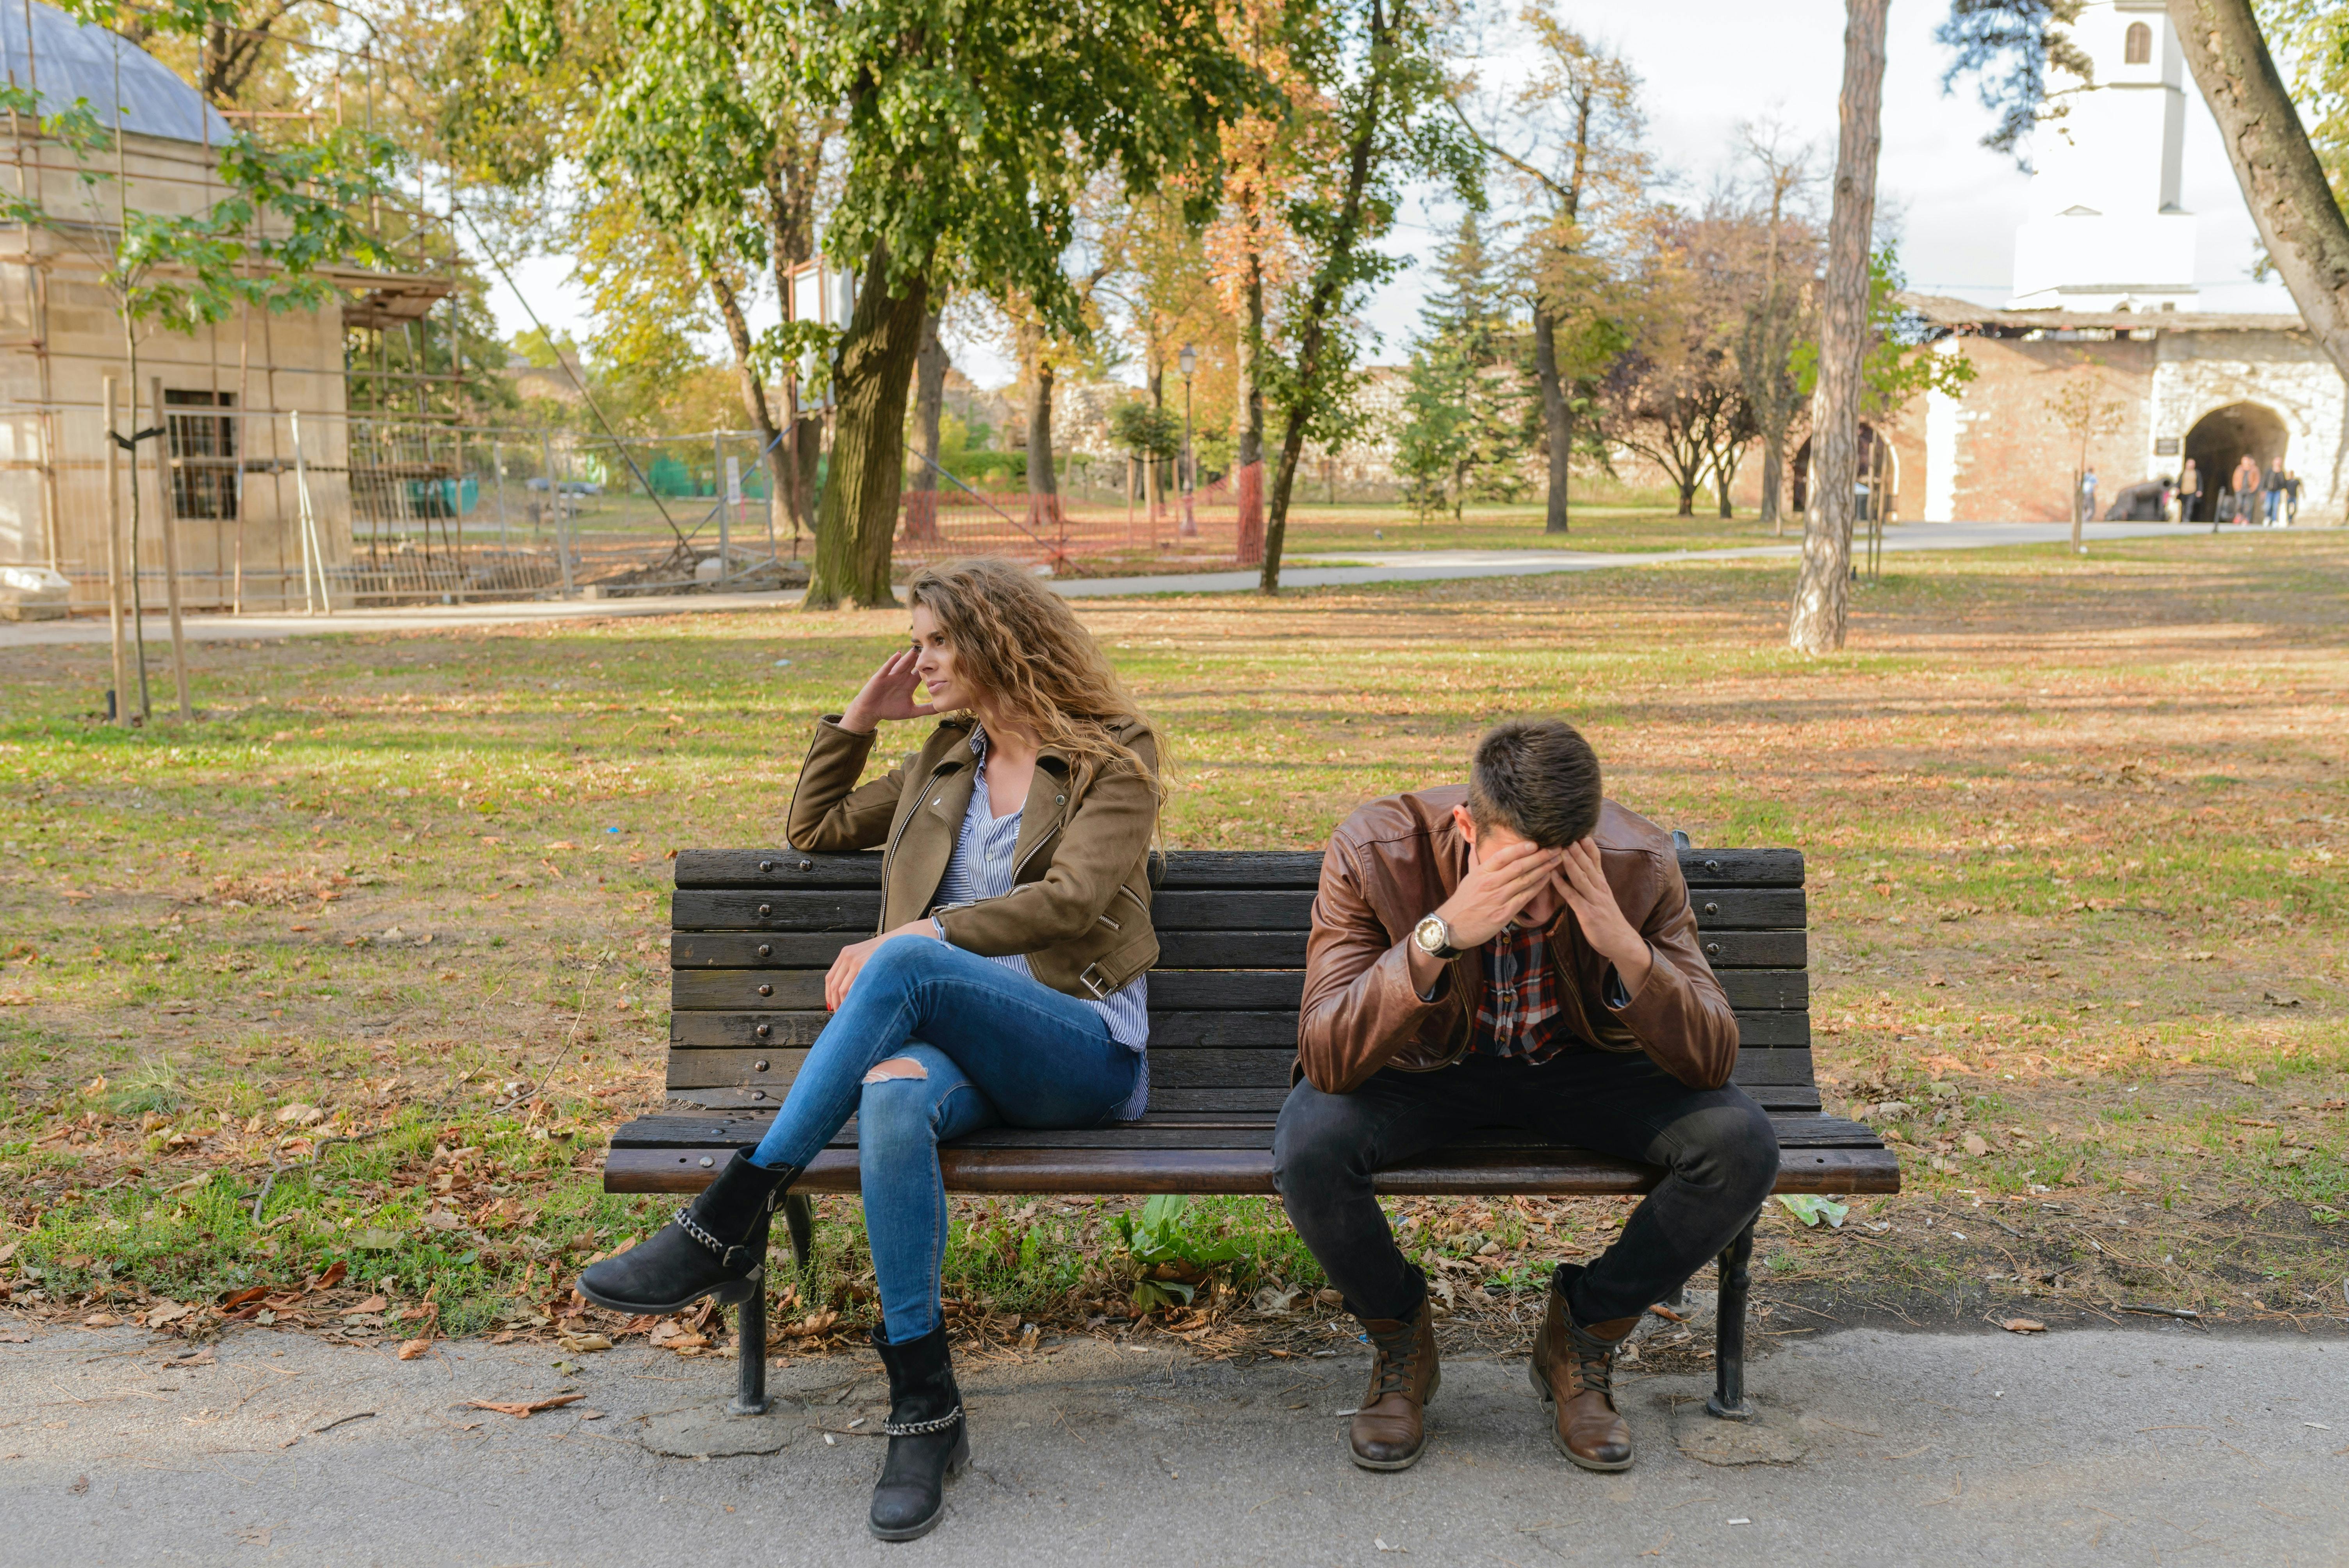 Couple in distress on a park bench